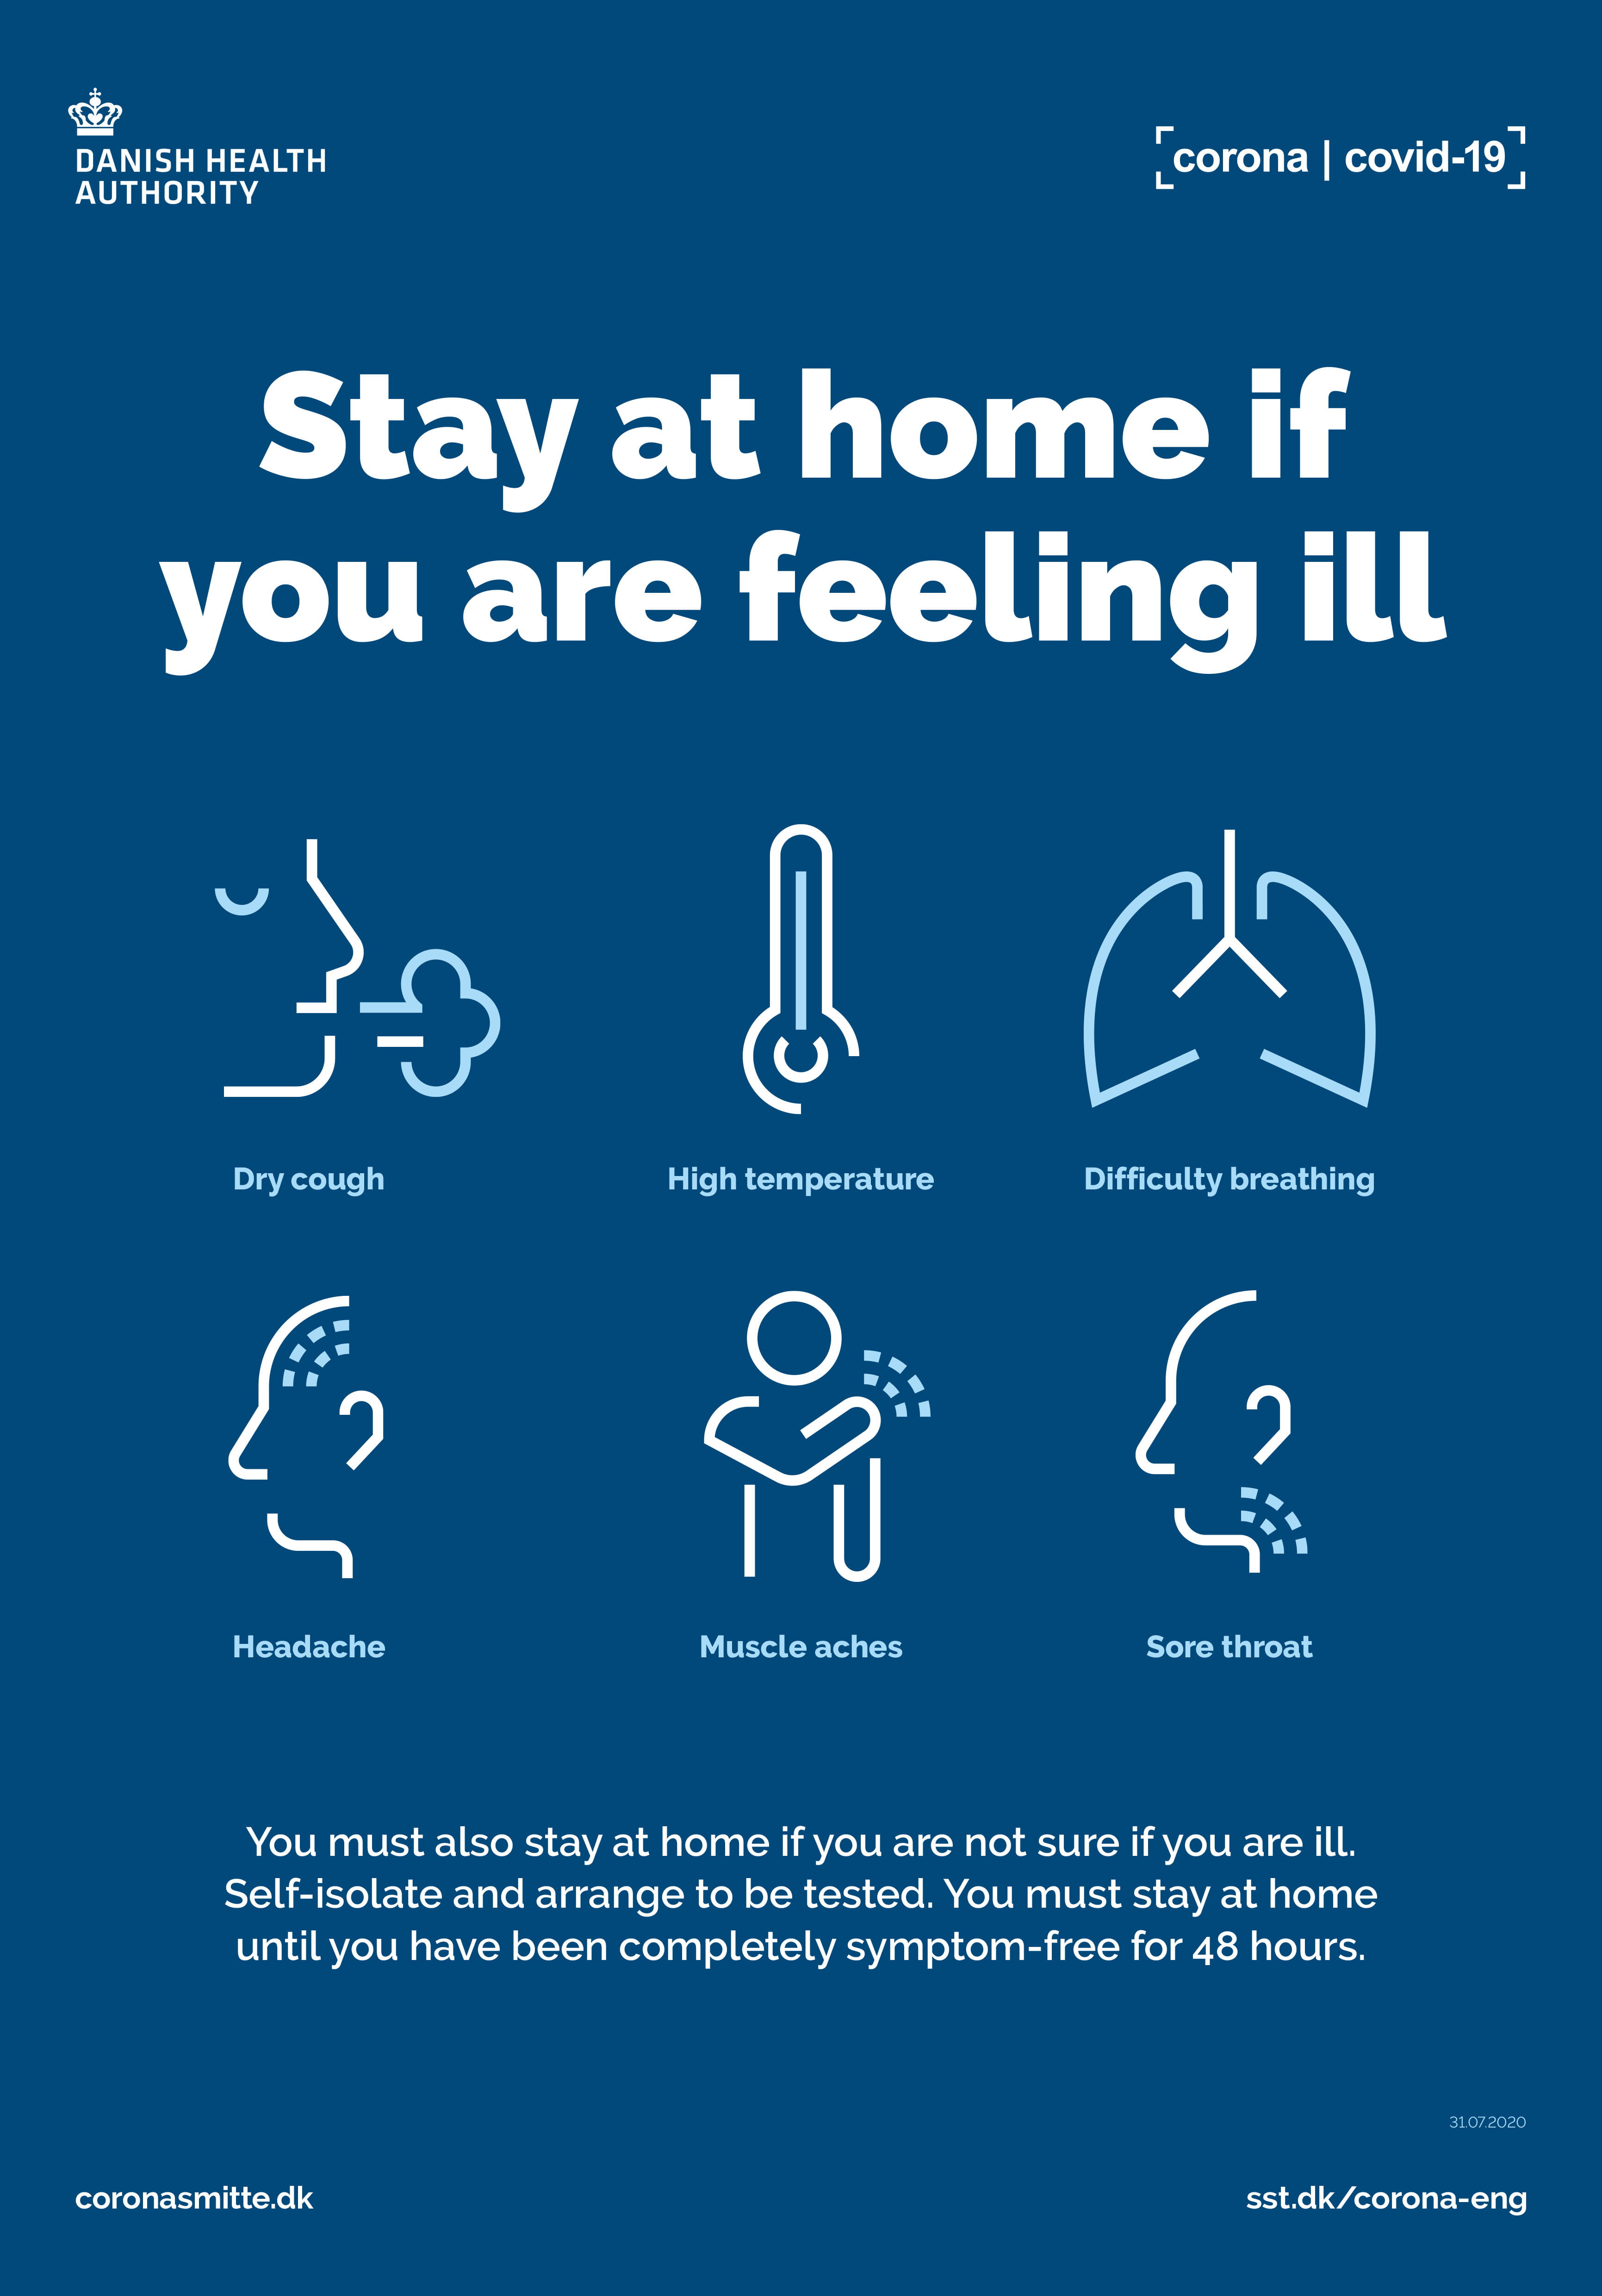 Stay home if you are feeling ill